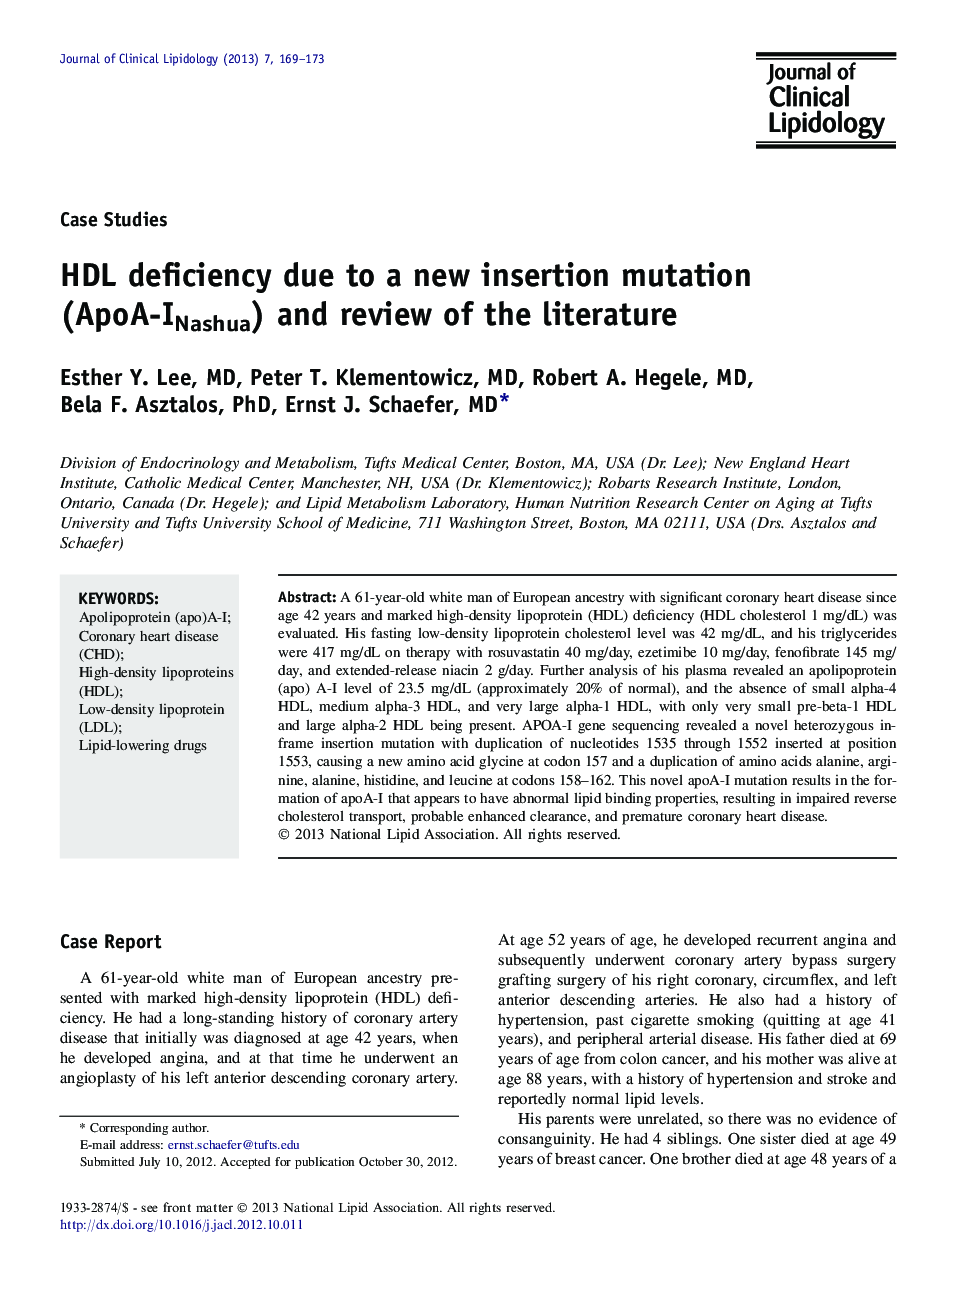 HDL deficiency due to a new insertion mutation (ApoA-INashua) and review of the literature